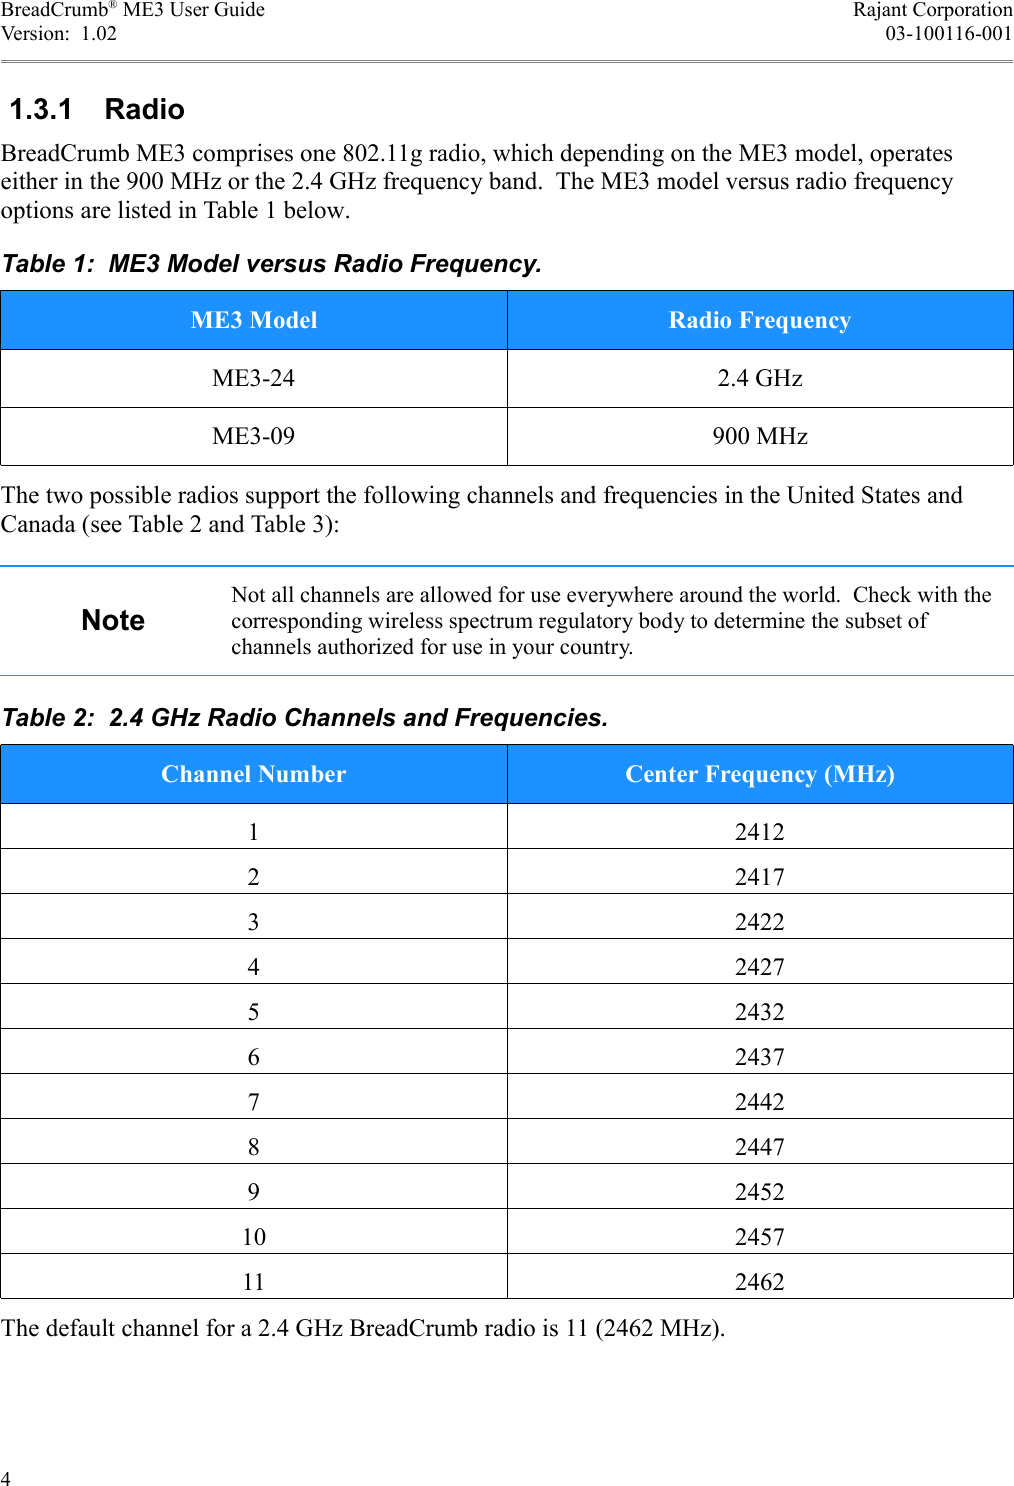 BreadCrumb® ME3 User Guide Rajant CorporationVersion:  1.02 03-100116-001 1.3.1  RadioBreadCrumb ME3 comprises one 802.11g radio, which depending on the ME3 model, operates either in the 900 MHz or the 2.4 GHz frequency band.  The ME3 model versus radio frequency options are listed in Table 1 below.Table 1:  ME3 Model versus Radio Frequency.ME3 Model Radio FrequencyME3-24 2.4 GHzME3-09 900 MHzThe two possible radios support the following channels and frequencies in the United States and Canada (see Table 2 and Table 3):NoteNot all channels are allowed for use everywhere around the world.  Check with the corresponding wireless spectrum regulatory body to determine the subset of channels authorized for use in your country.Table 2:  2.4 GHz Radio Channels and Frequencies.Channel Number Center Frequency (MHz)124122241732422424275243262437724428244792452102457112462The default channel for a 2.4 GHz BreadCrumb radio is 11 (2462 MHz).4